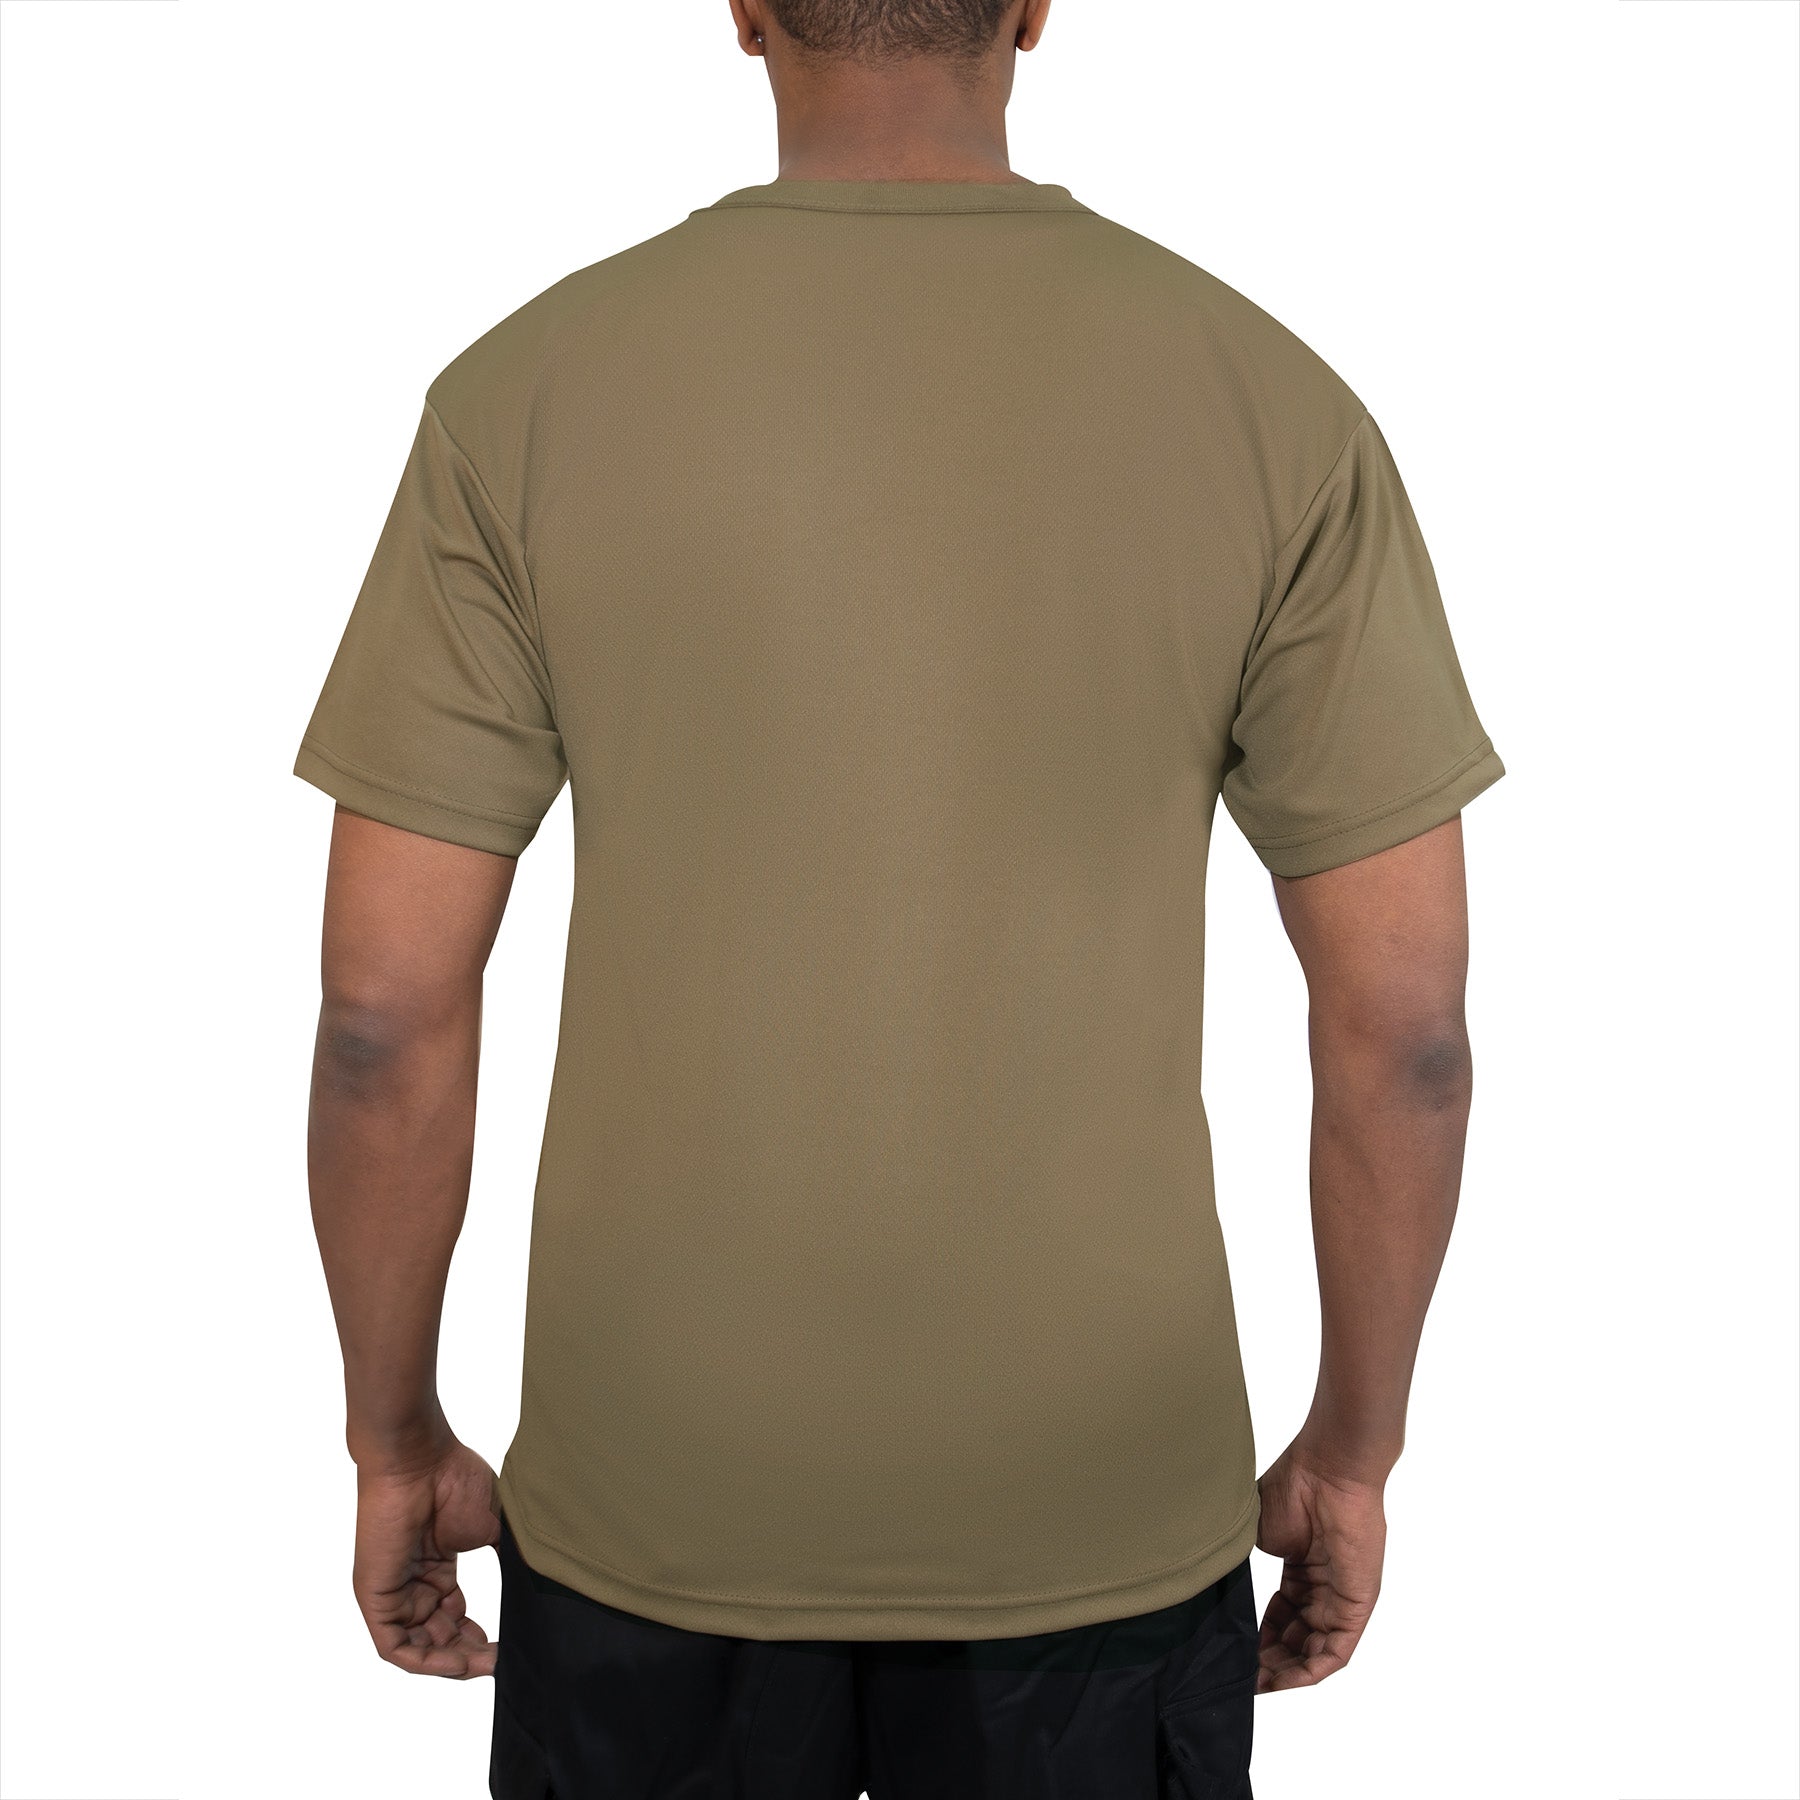 [AR 670-1] Poly Quick Dry Moisture Wicking T-Shirts